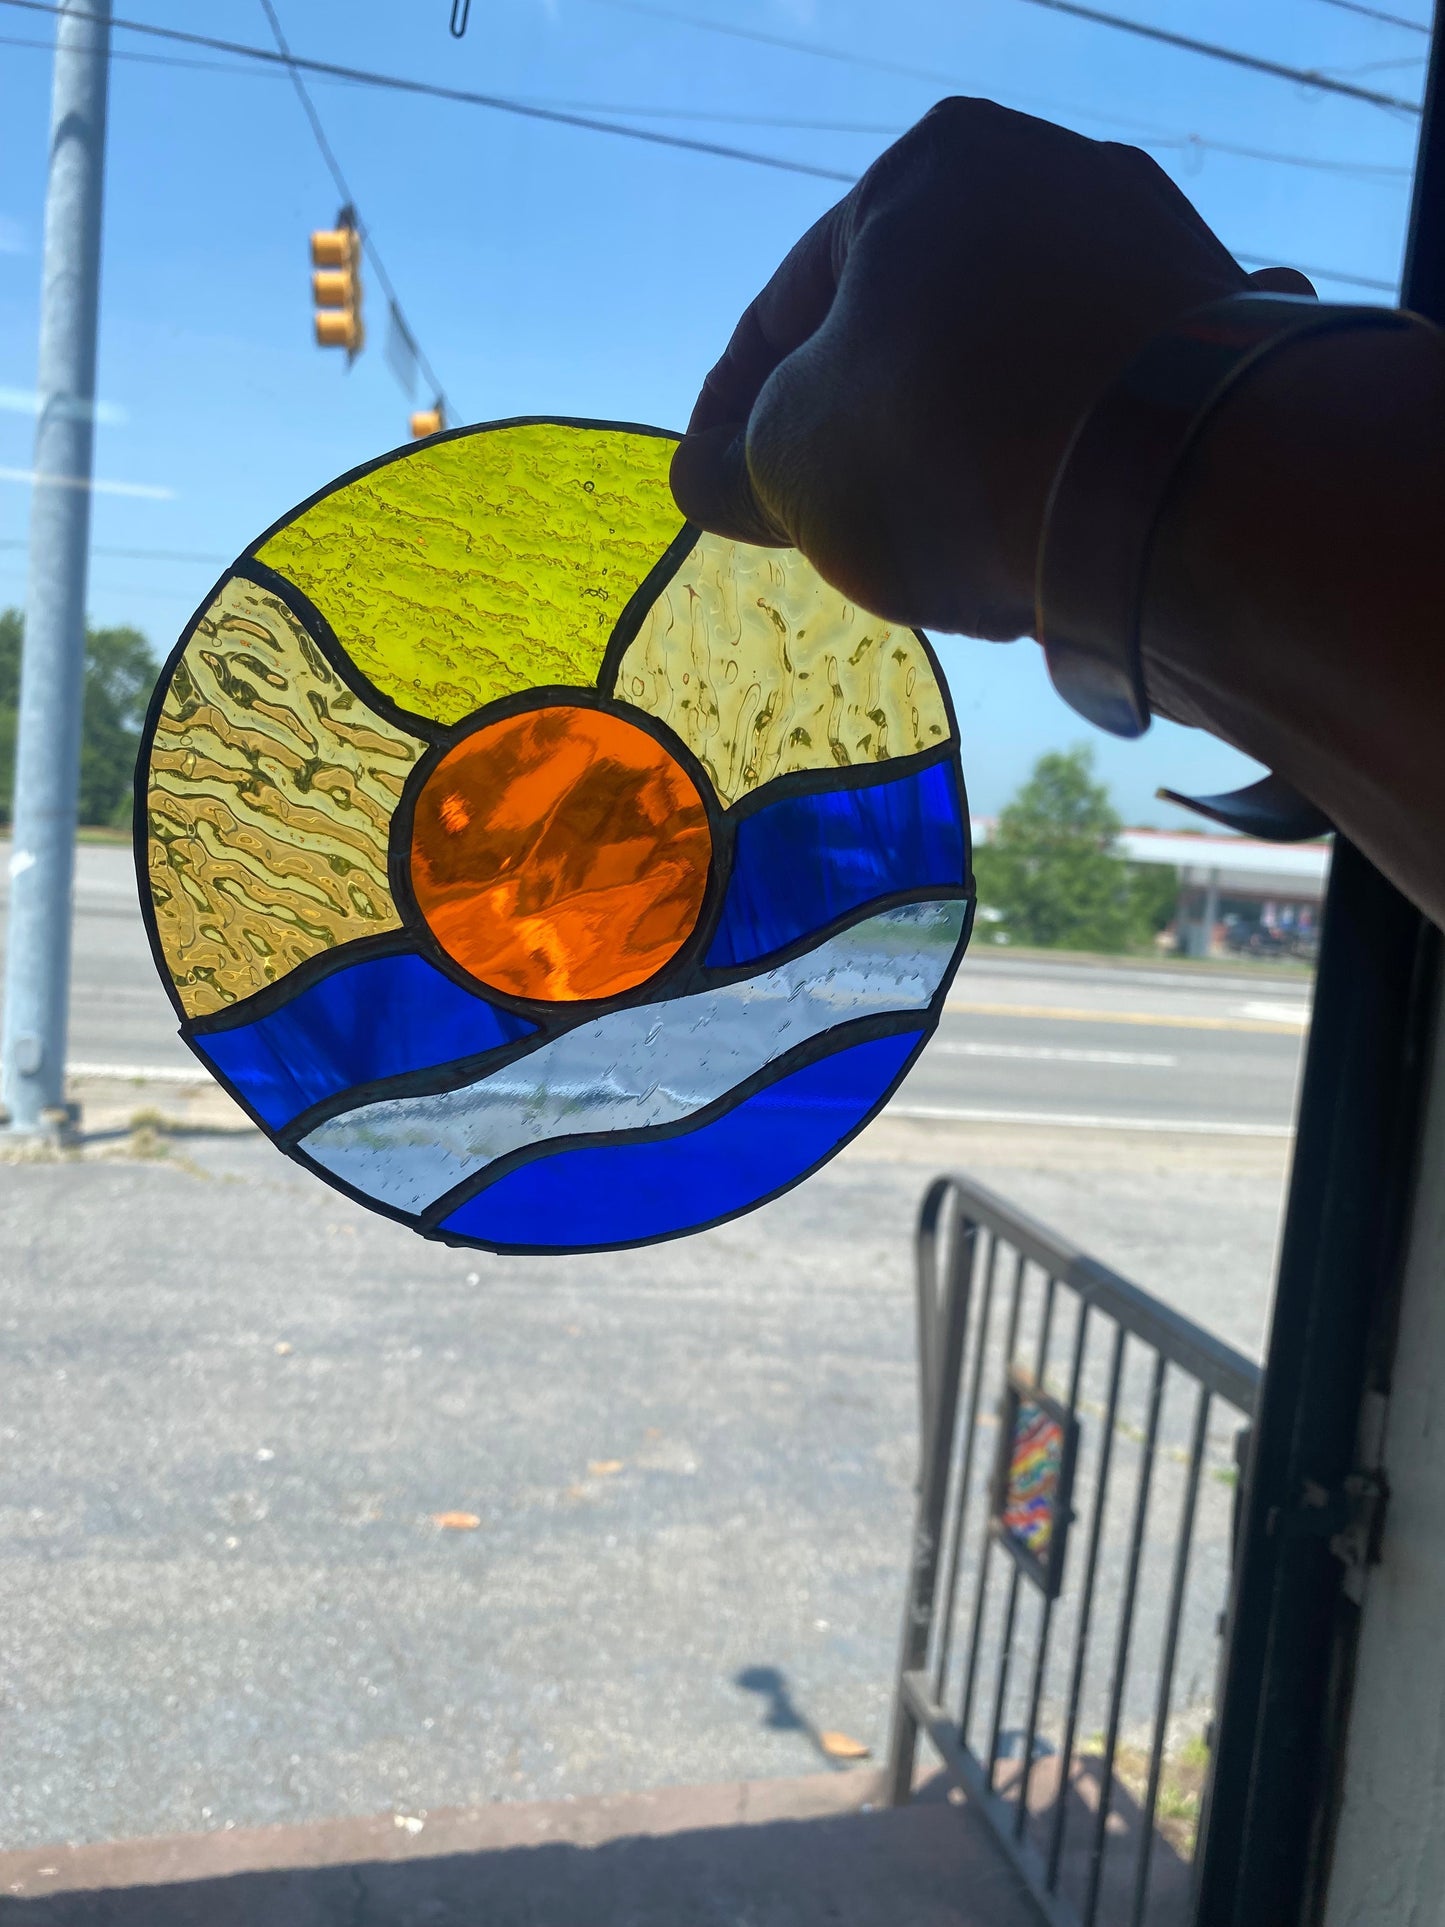 Beginner Stained Glass class, March 7, 11-2